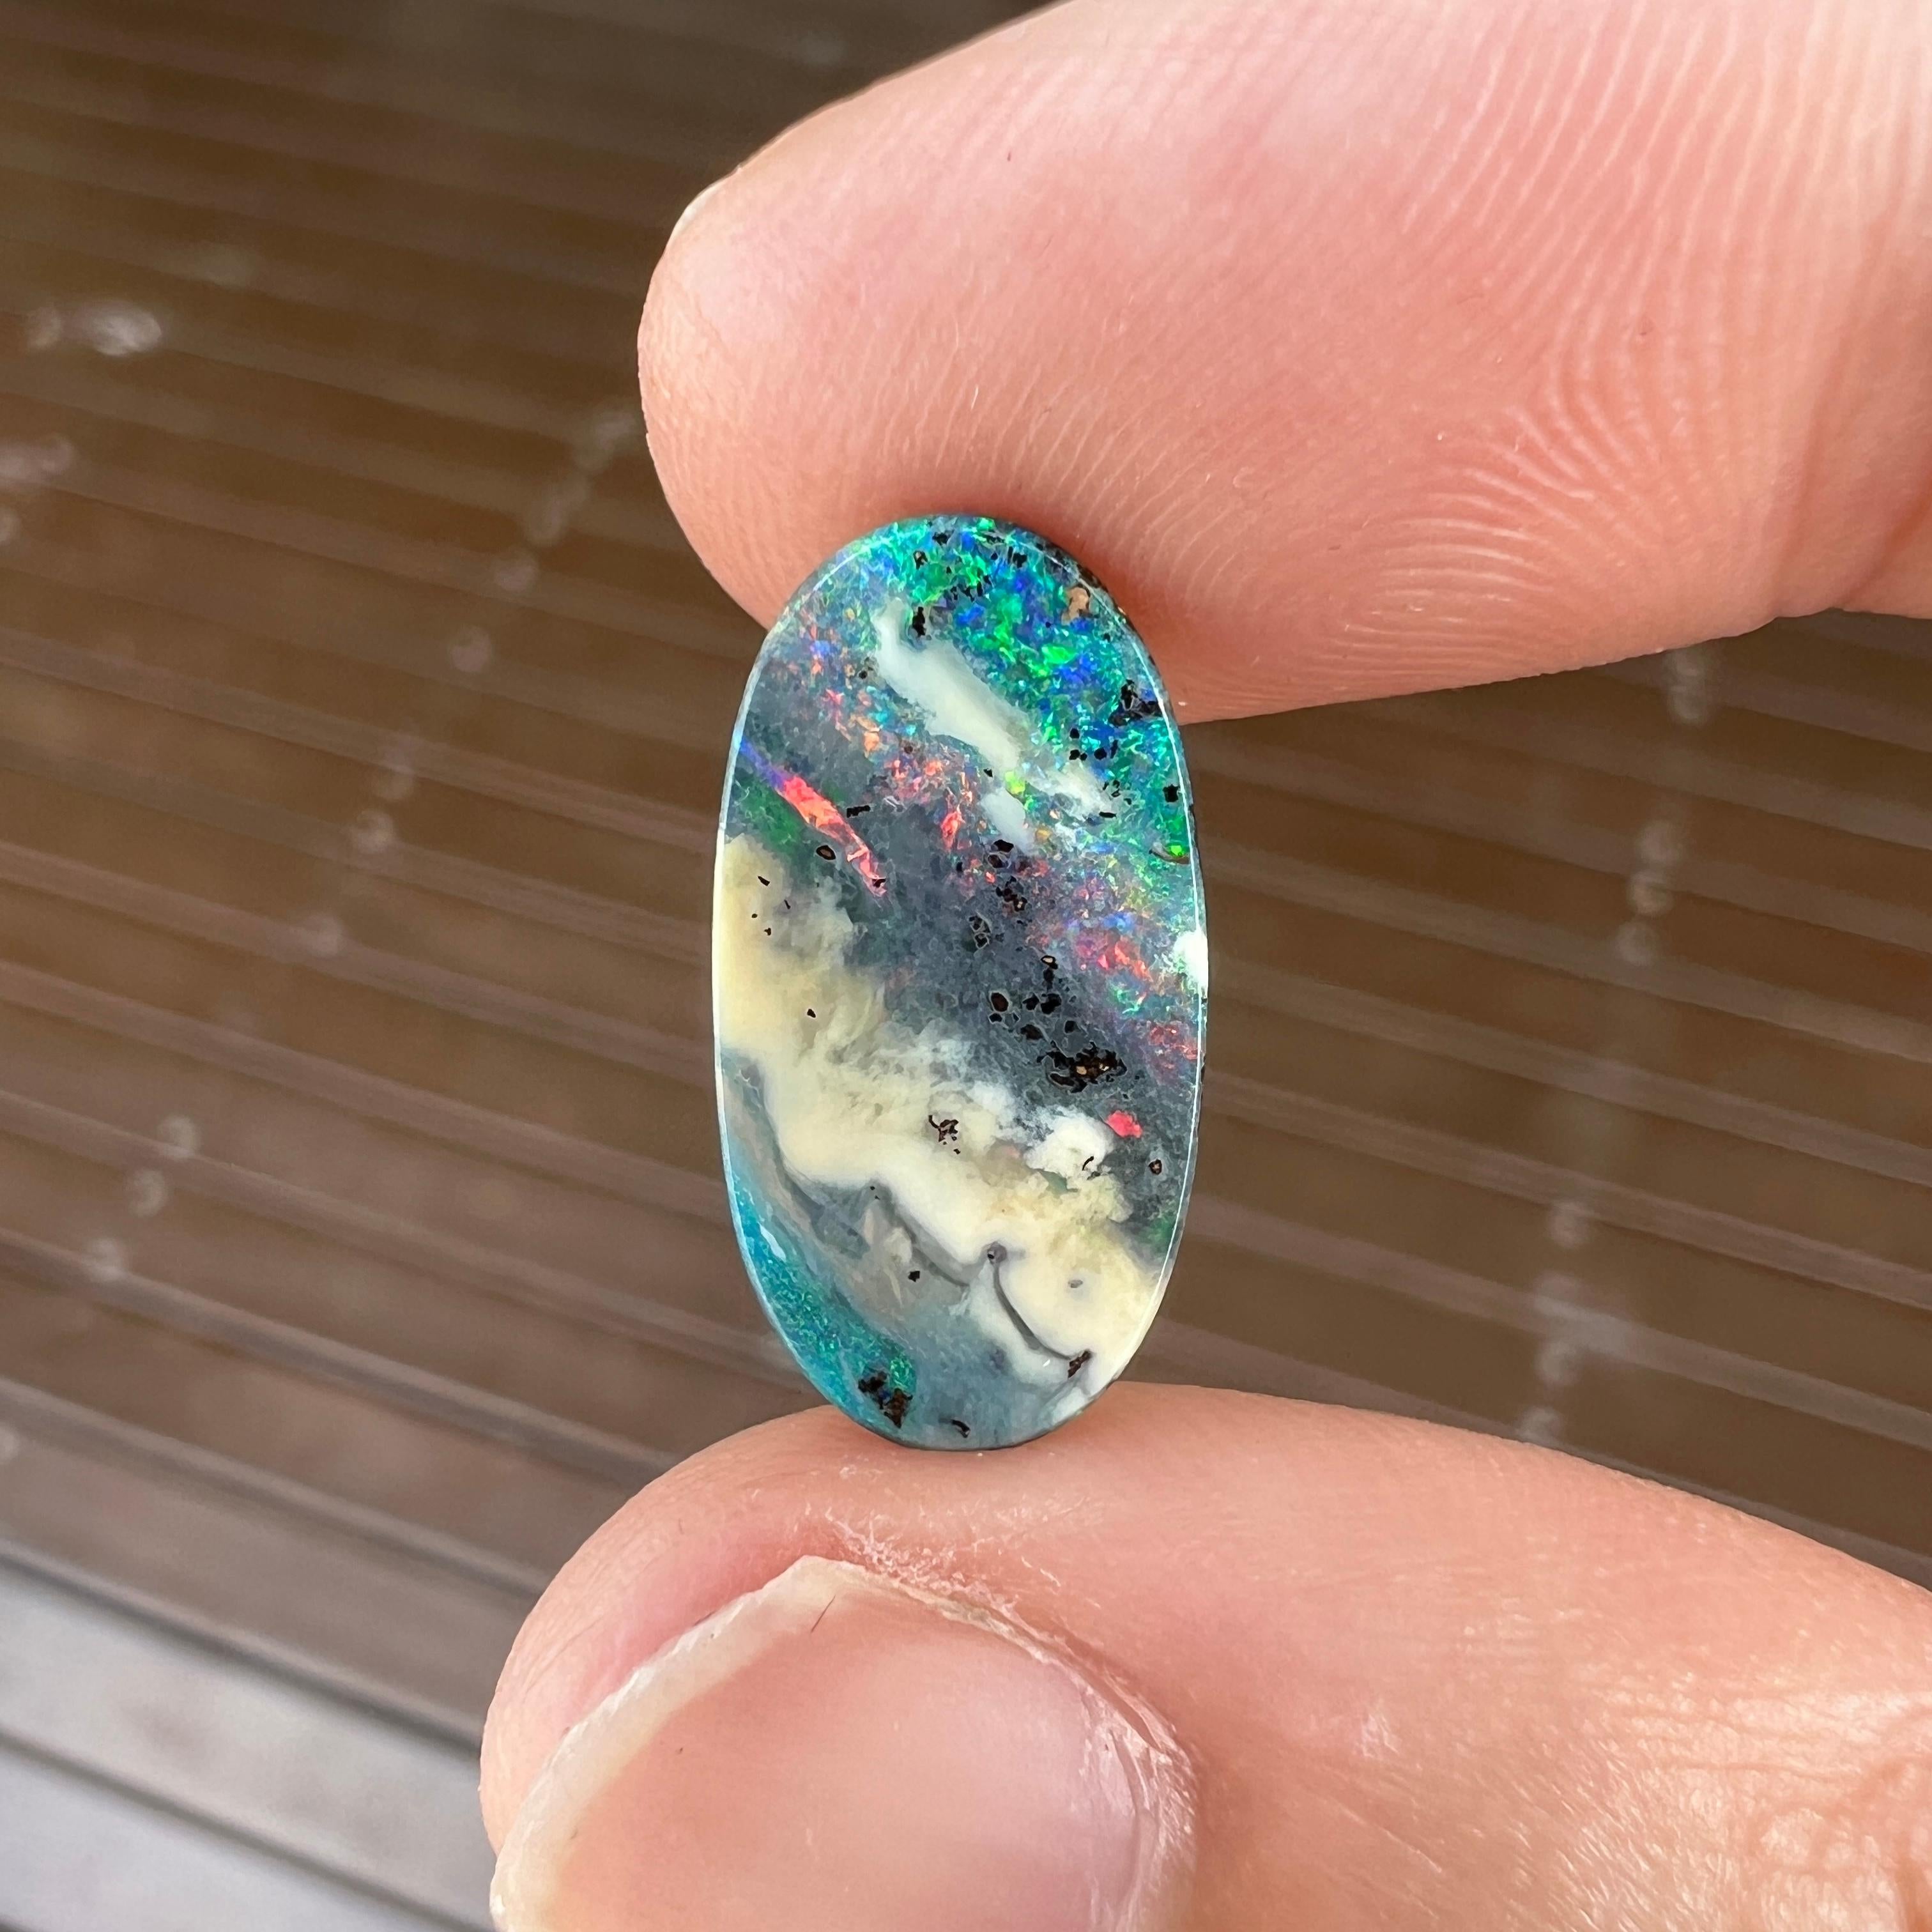 This lovely 4.26 Ct Australian boulder opal was mined by Sue Cooper at her Yaraka opal mine in western Queensland, Australia in 2024. Sue processed the rough opal herself and cut into into a oval shape. We especially love the contrasting stripes of